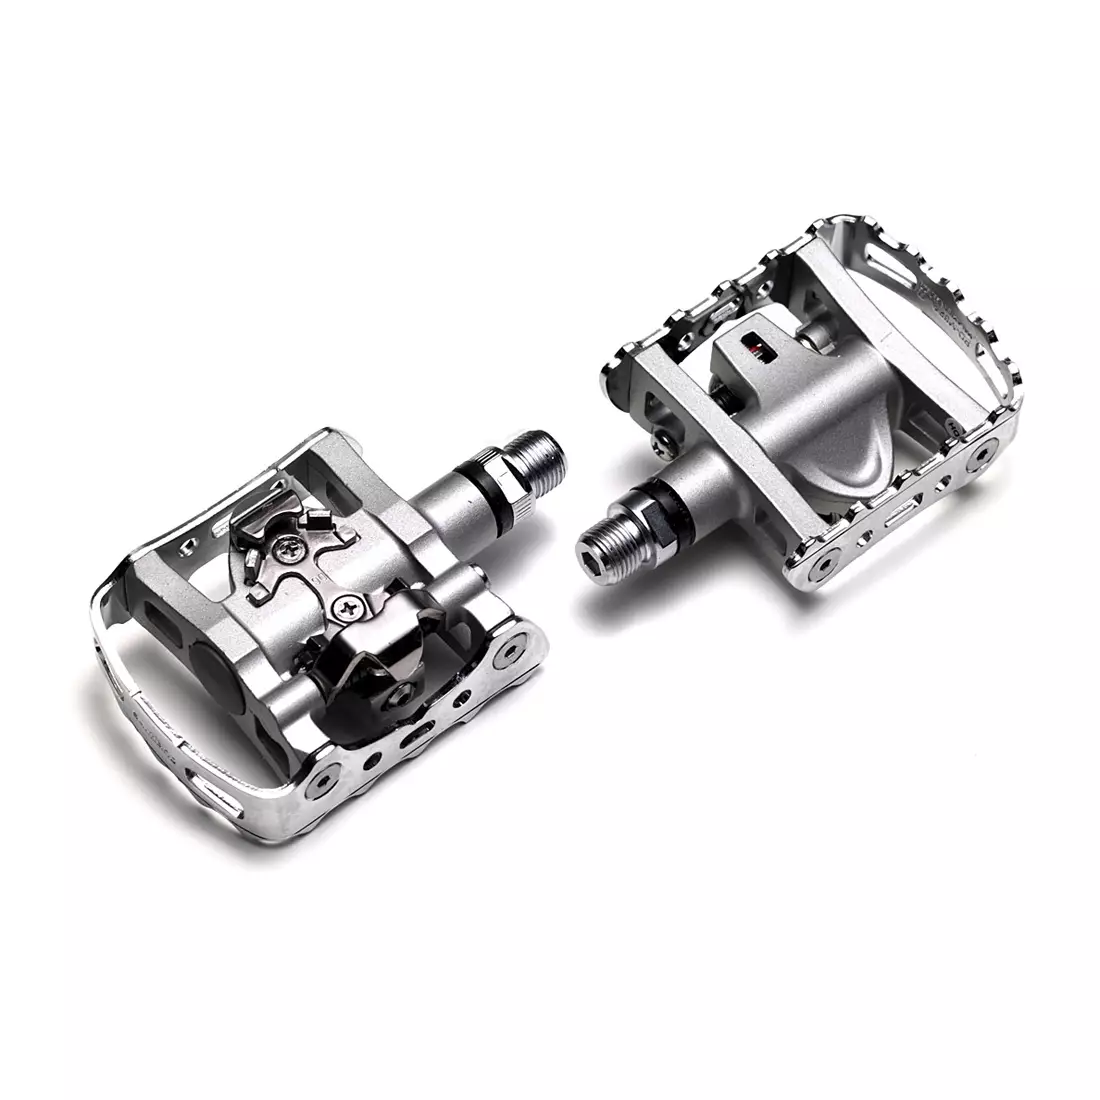 SHIMANO PD-M324- MTB / trekking bicycle pedals with cleats z SPD